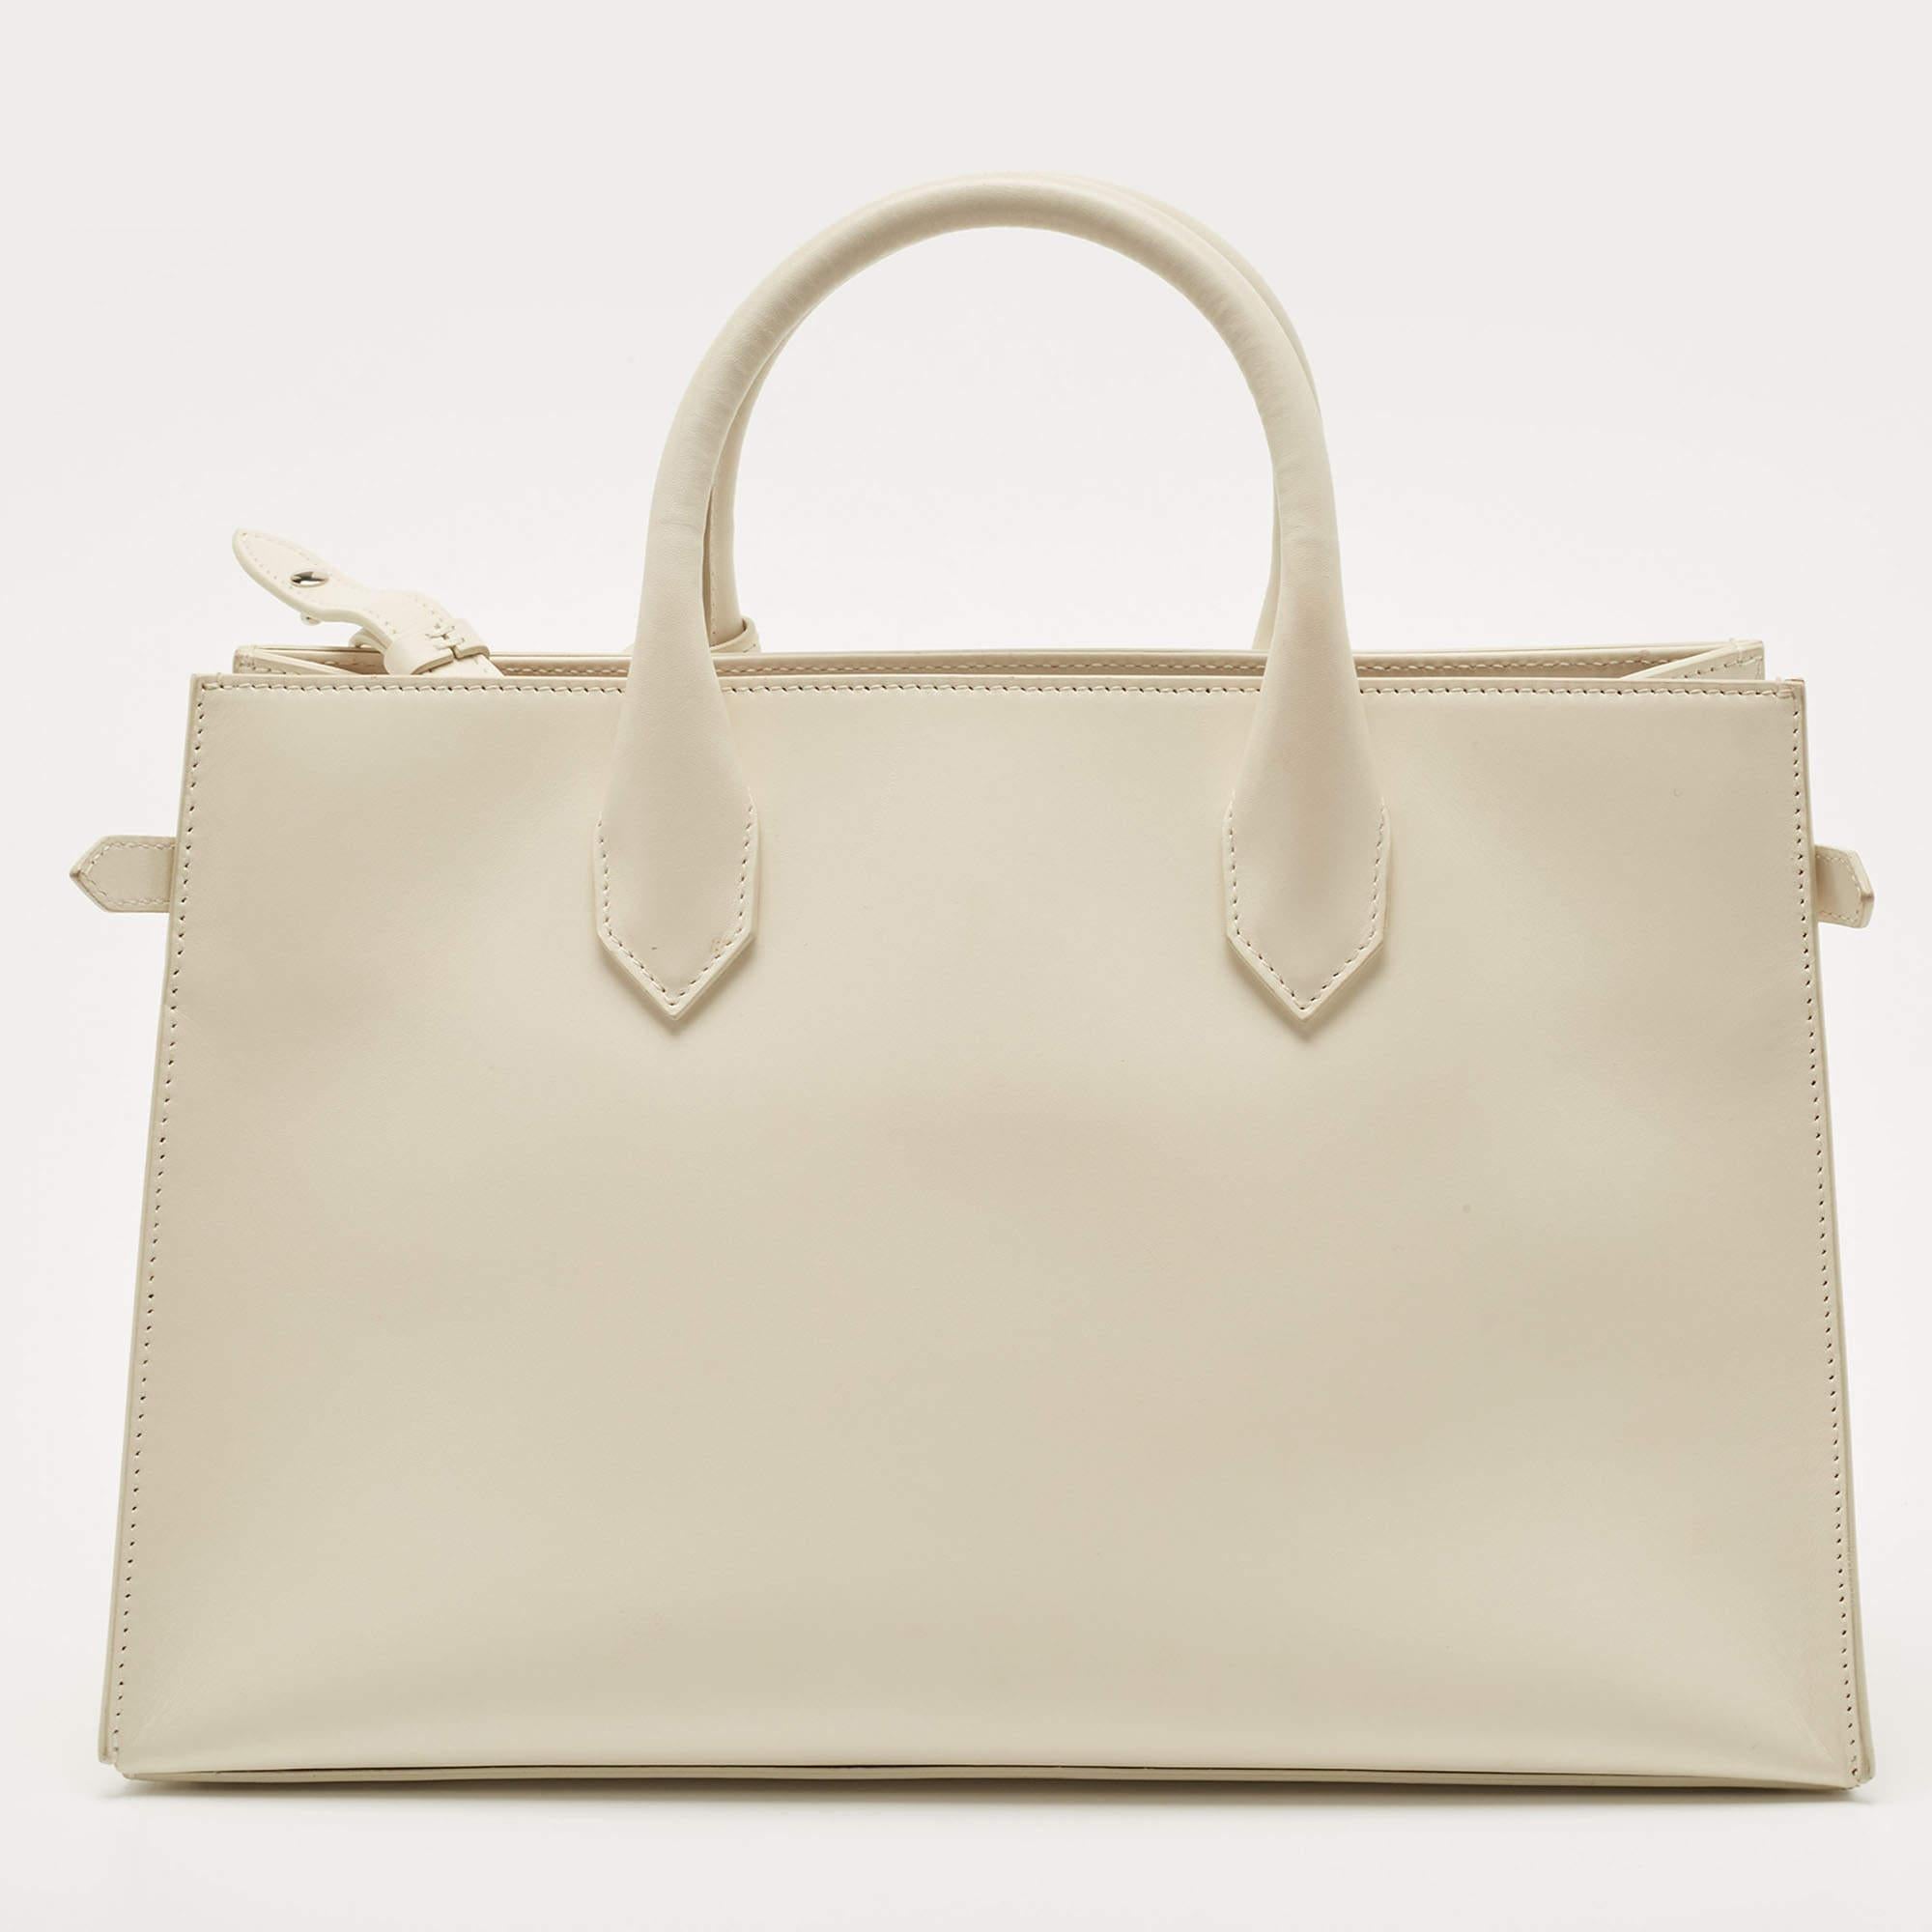 For daily use, this Balenciaga tote for women is ideal. Crafted from leather in a classy shade, the bag has a sleek silhouette with two top handles and silver-tone hardware. It is enhanced with a brand accent on the front.

Includes: Detachable Strap